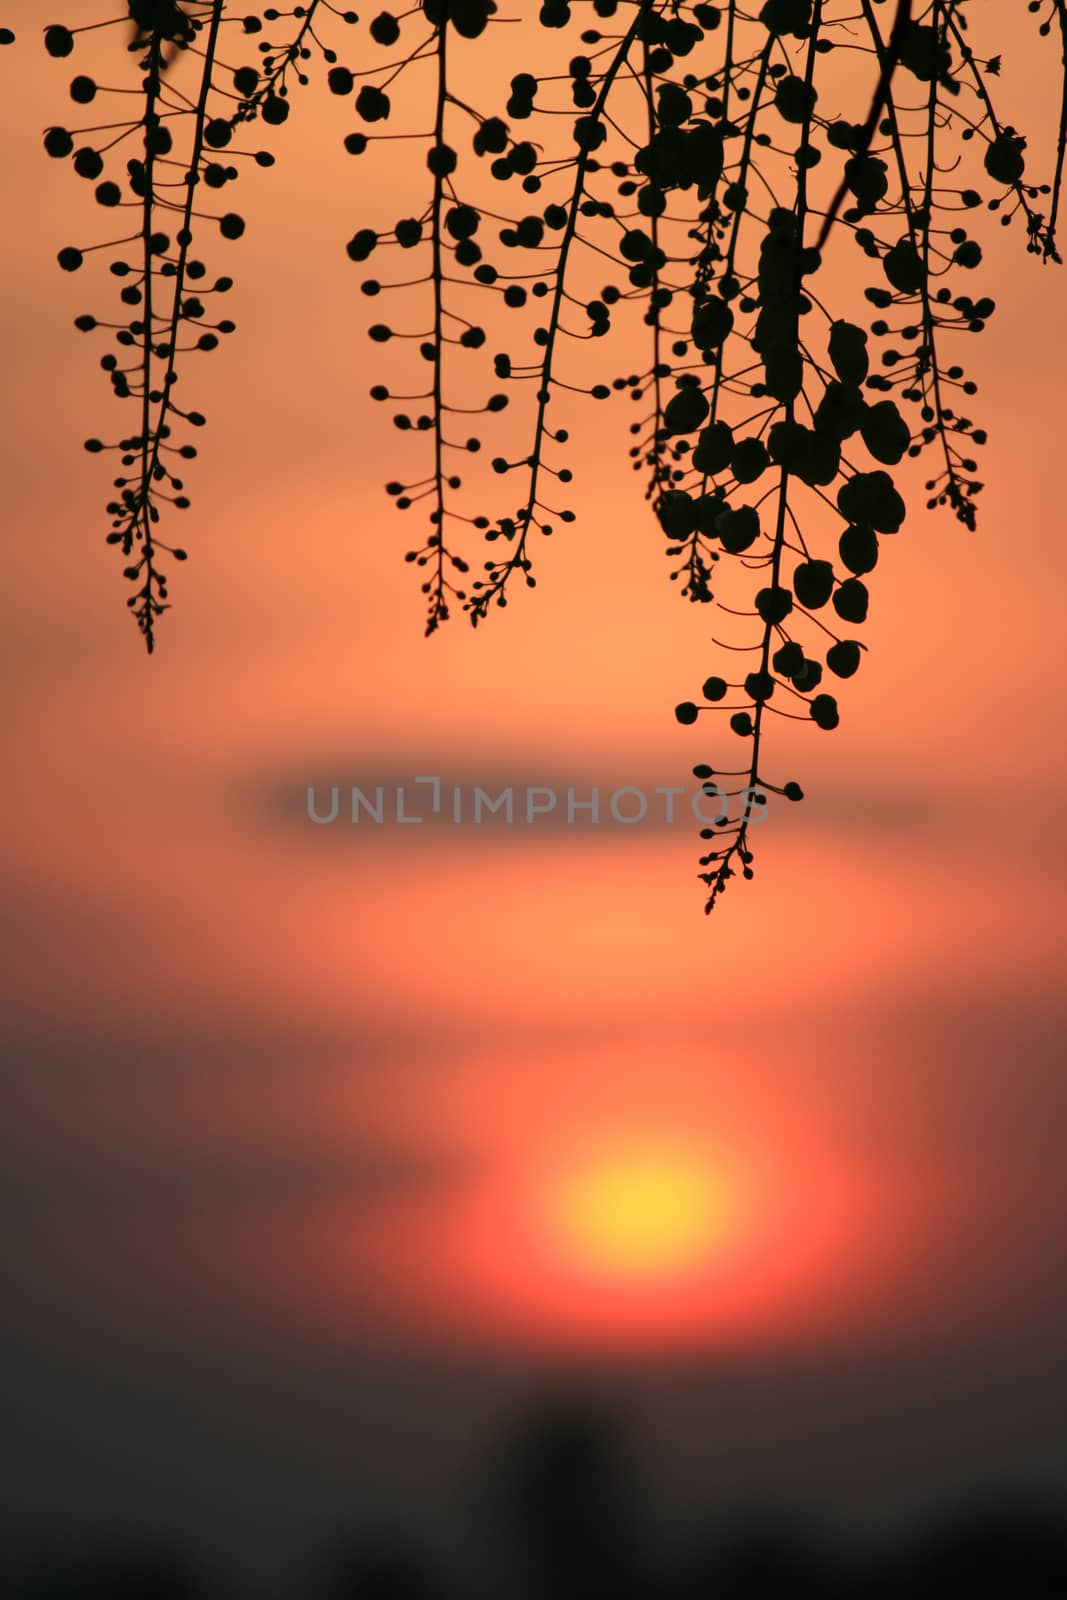 Flower silhouette at sunset